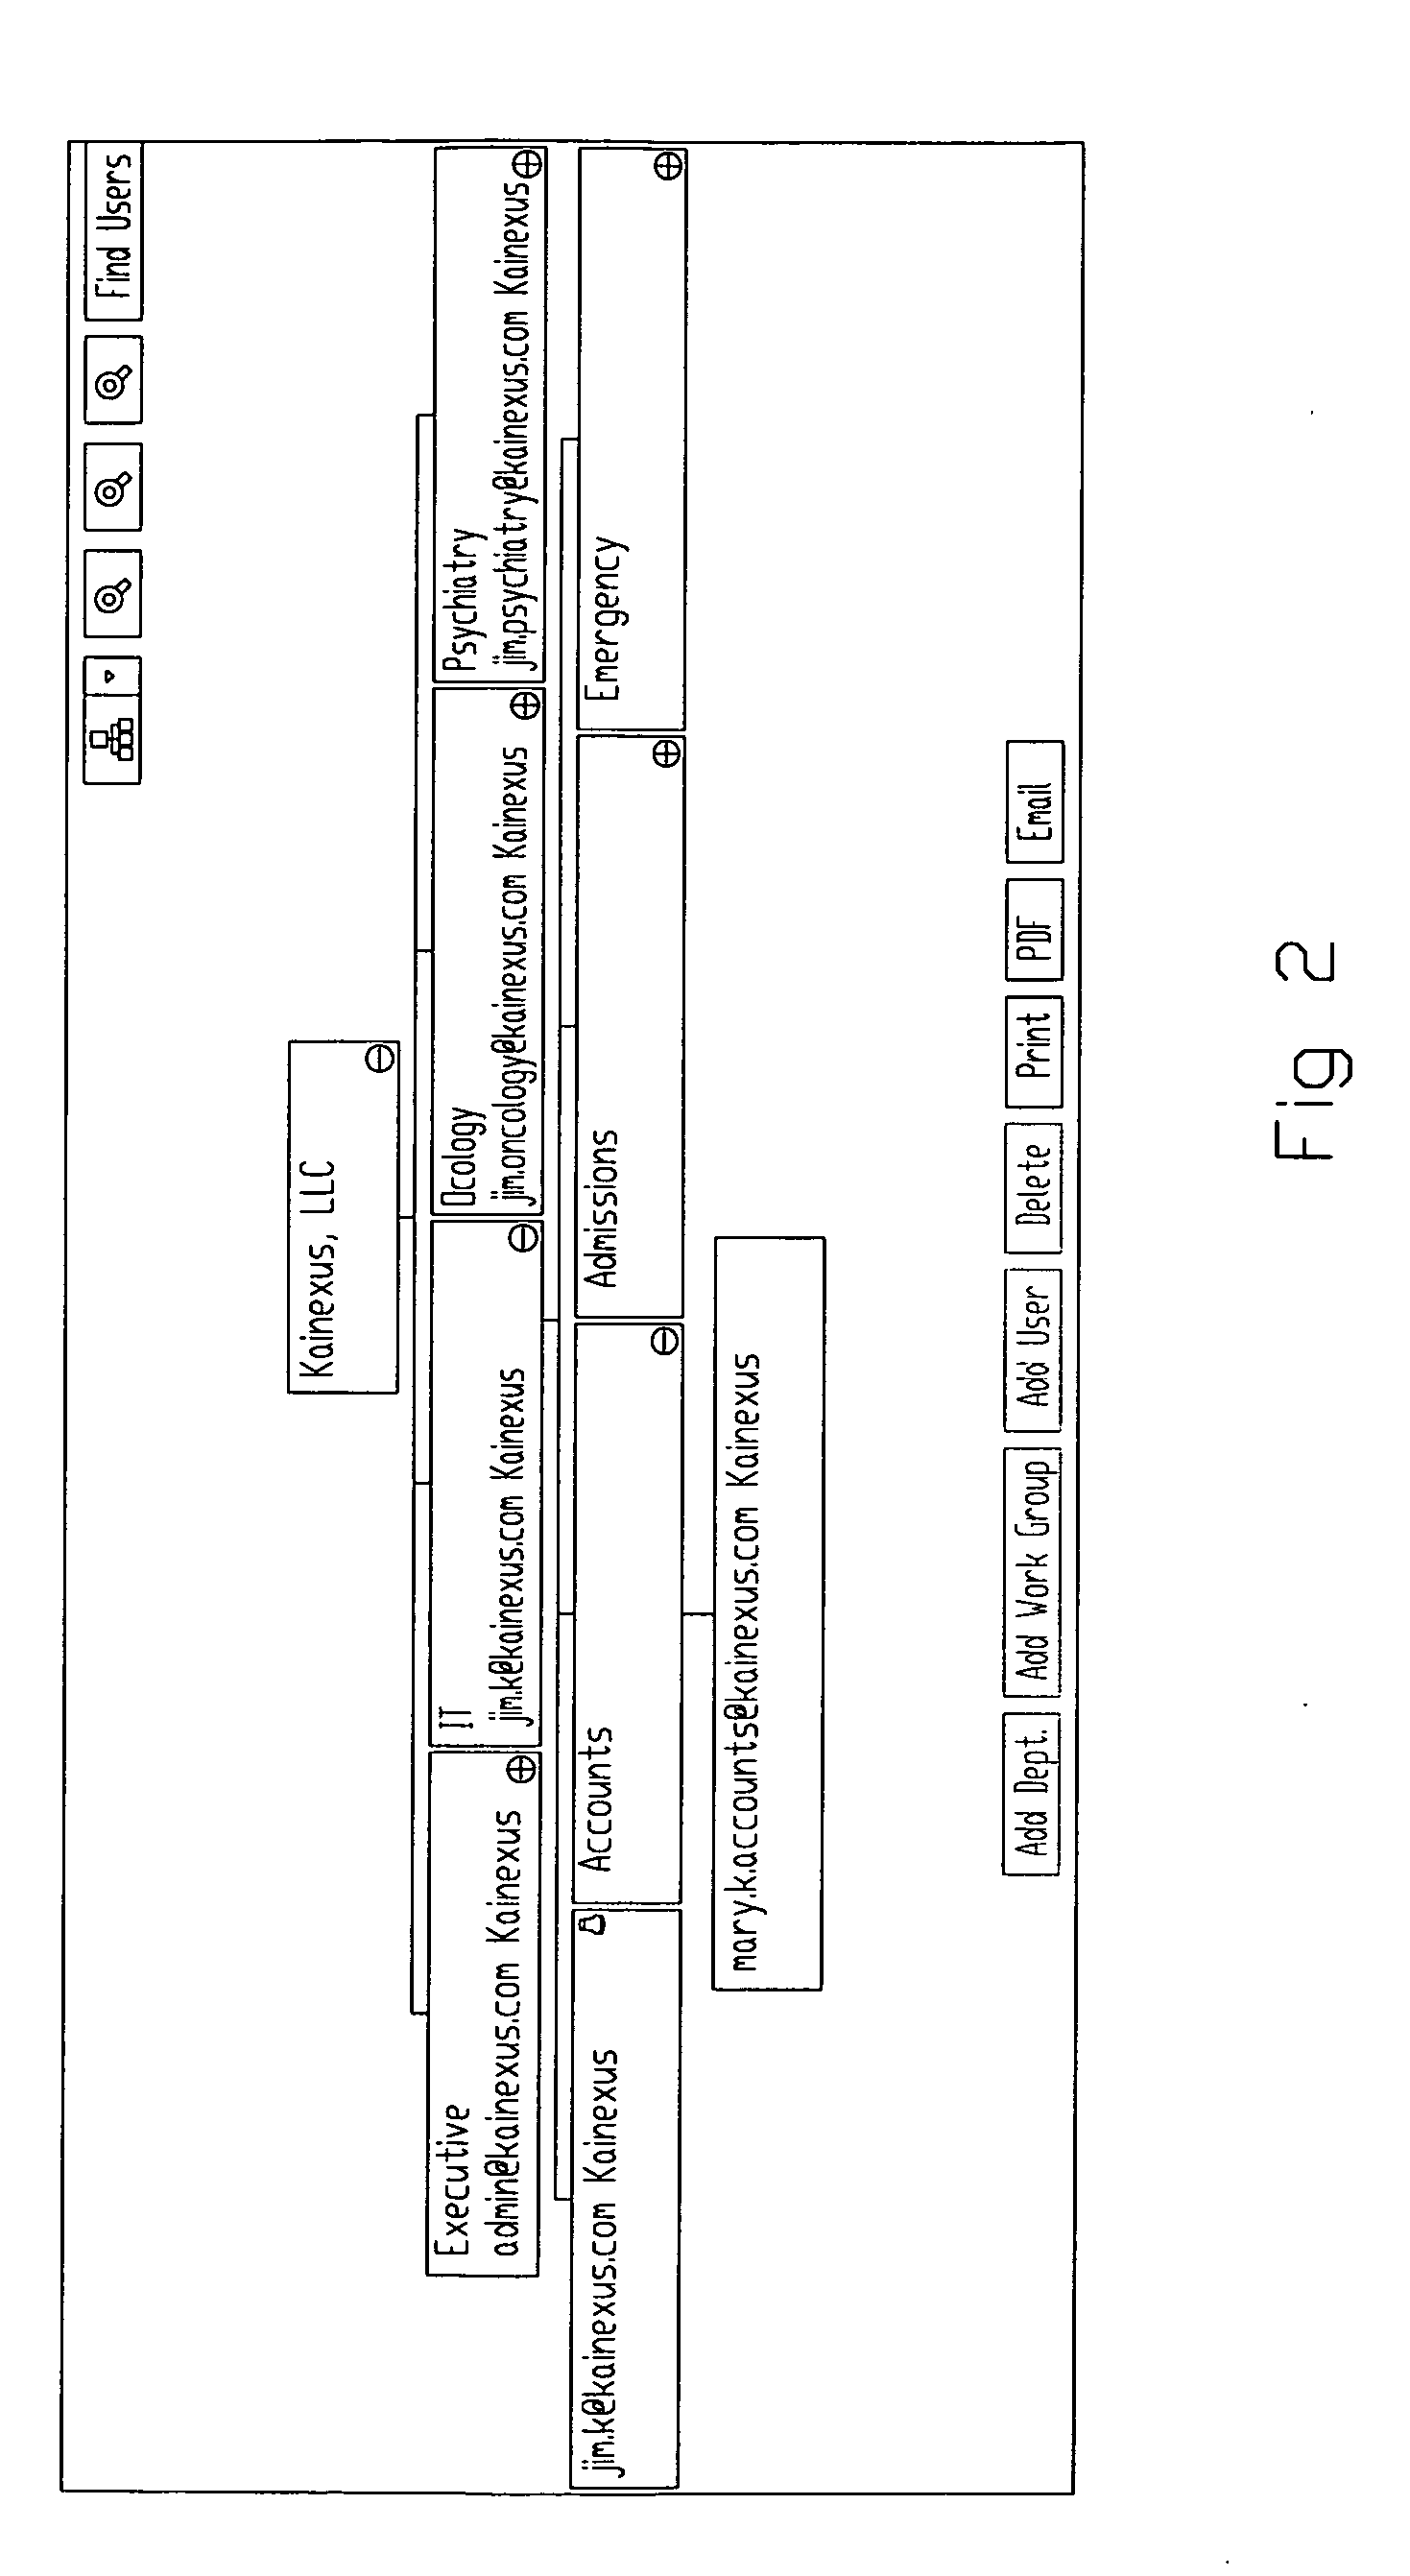 System and method for facilitating continous quality improvement